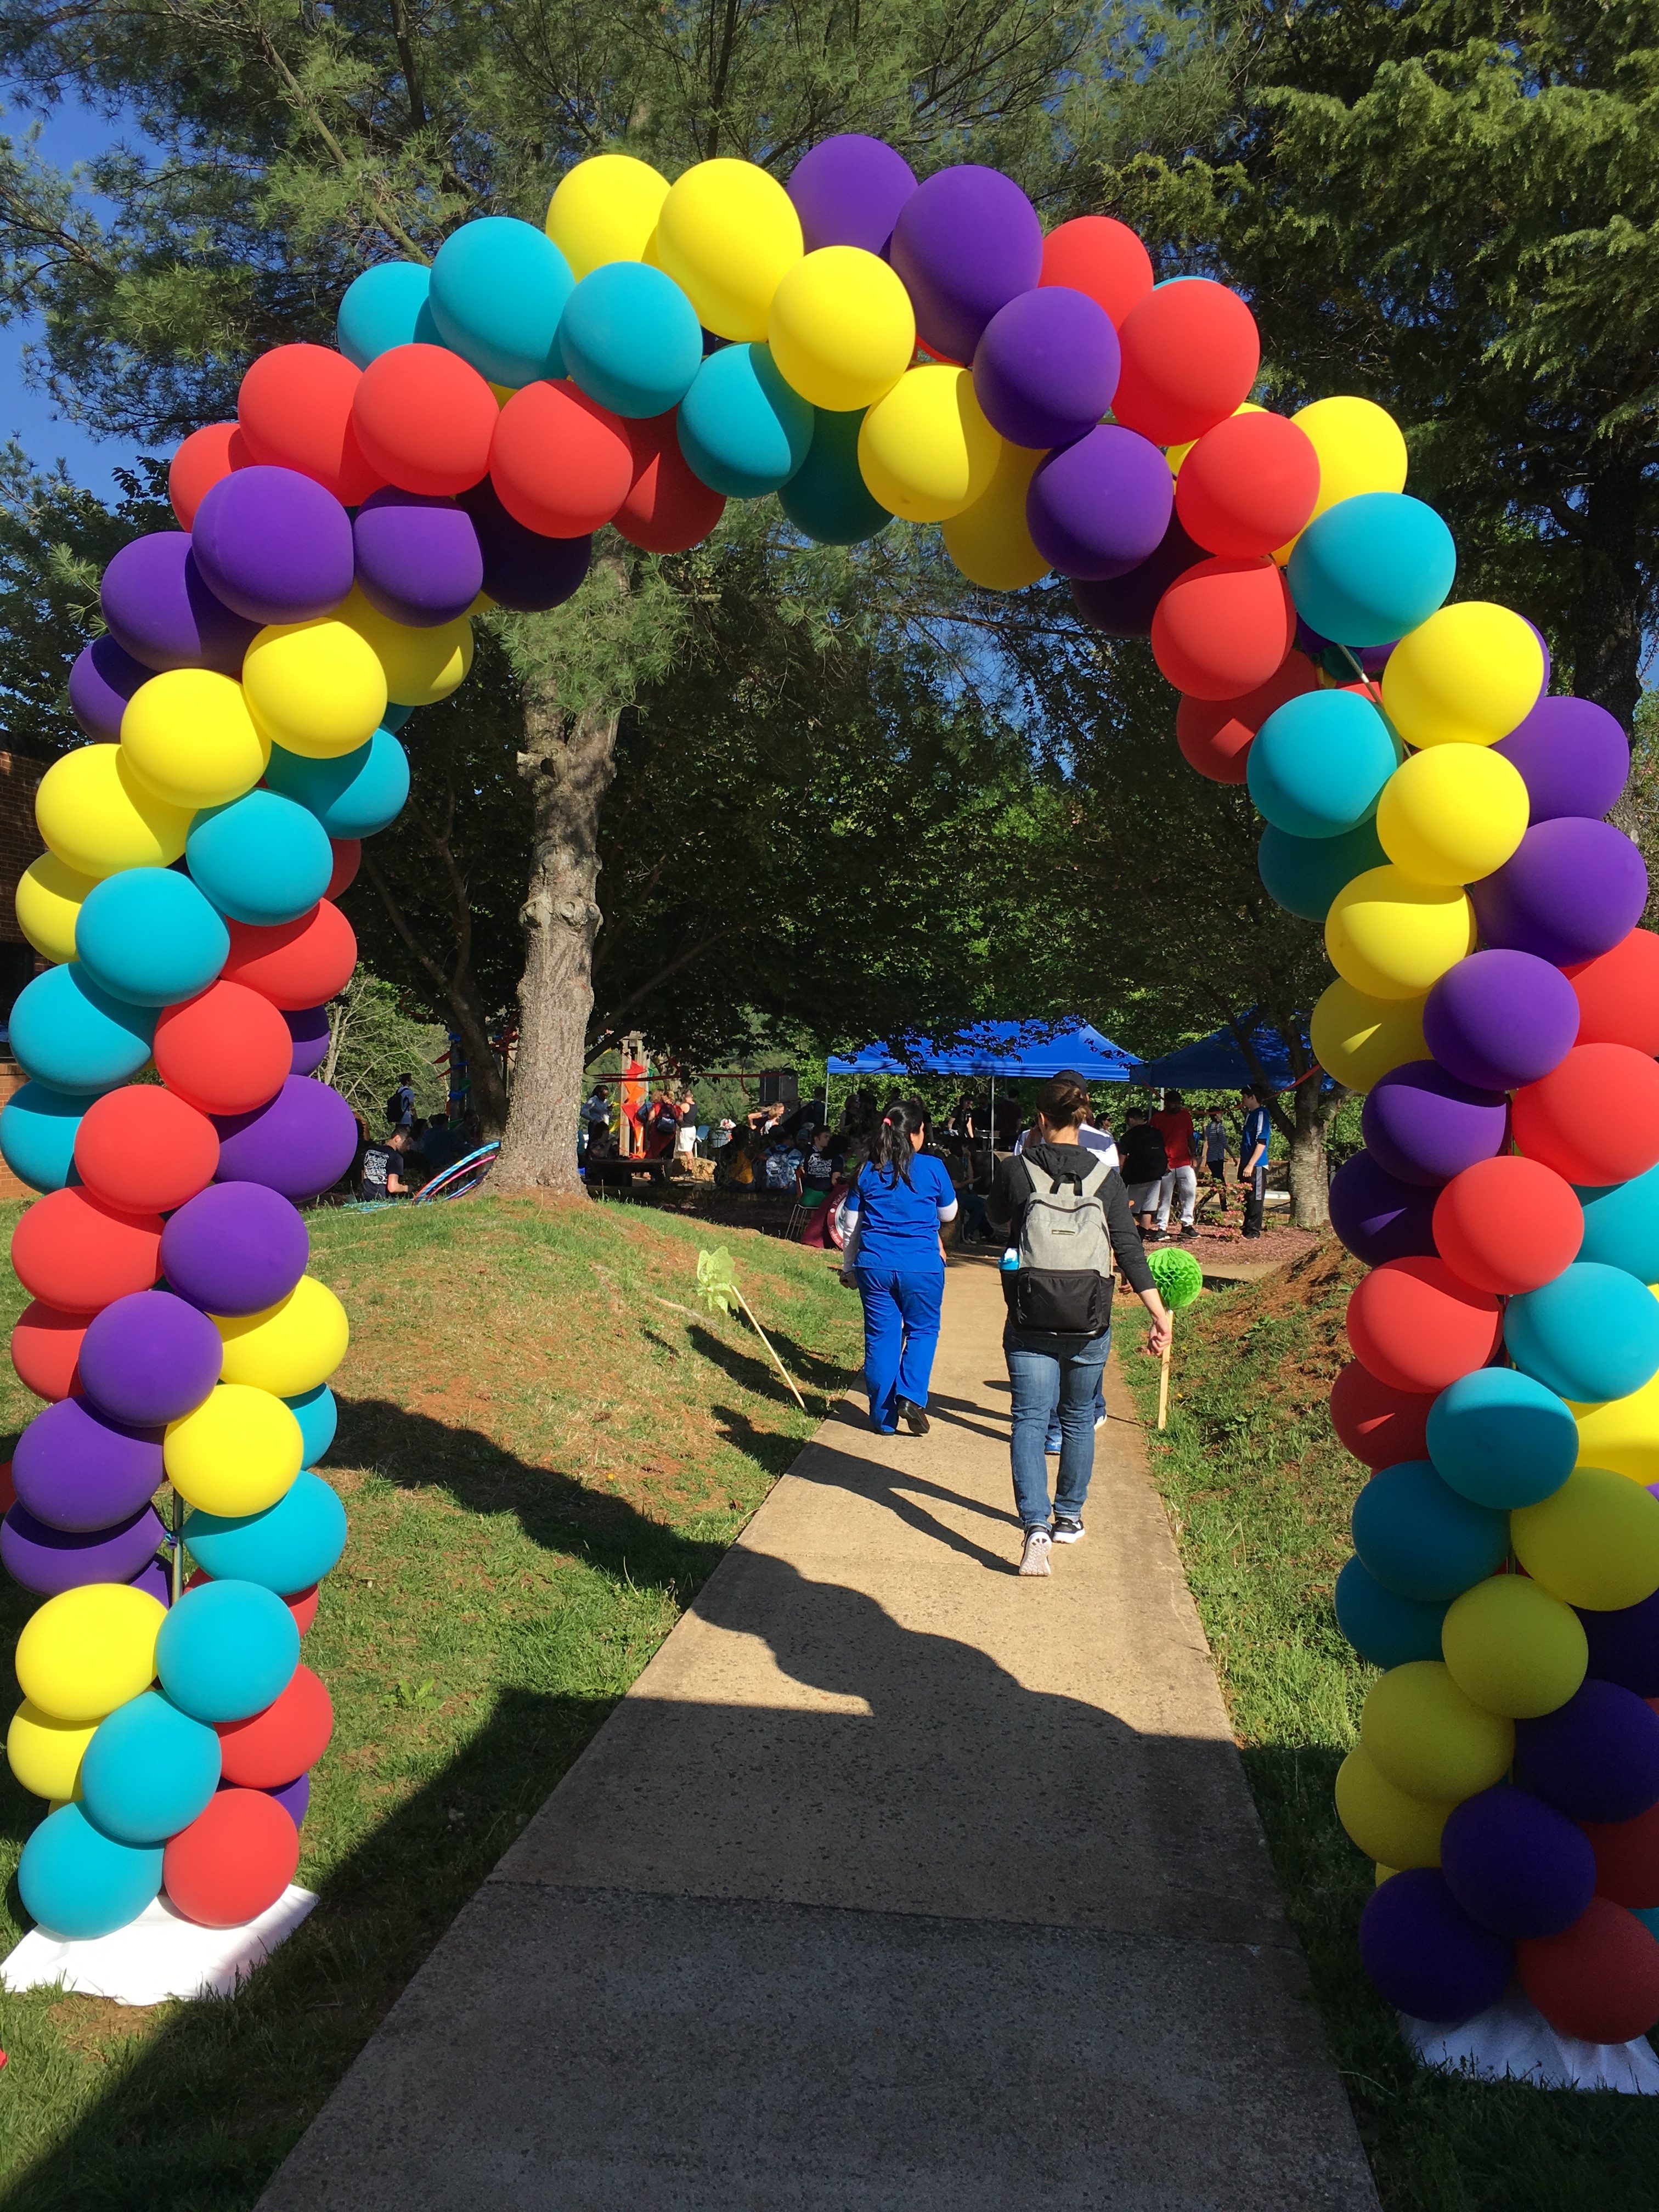 People attending Spring Fling pass under a colorful balloon arch.